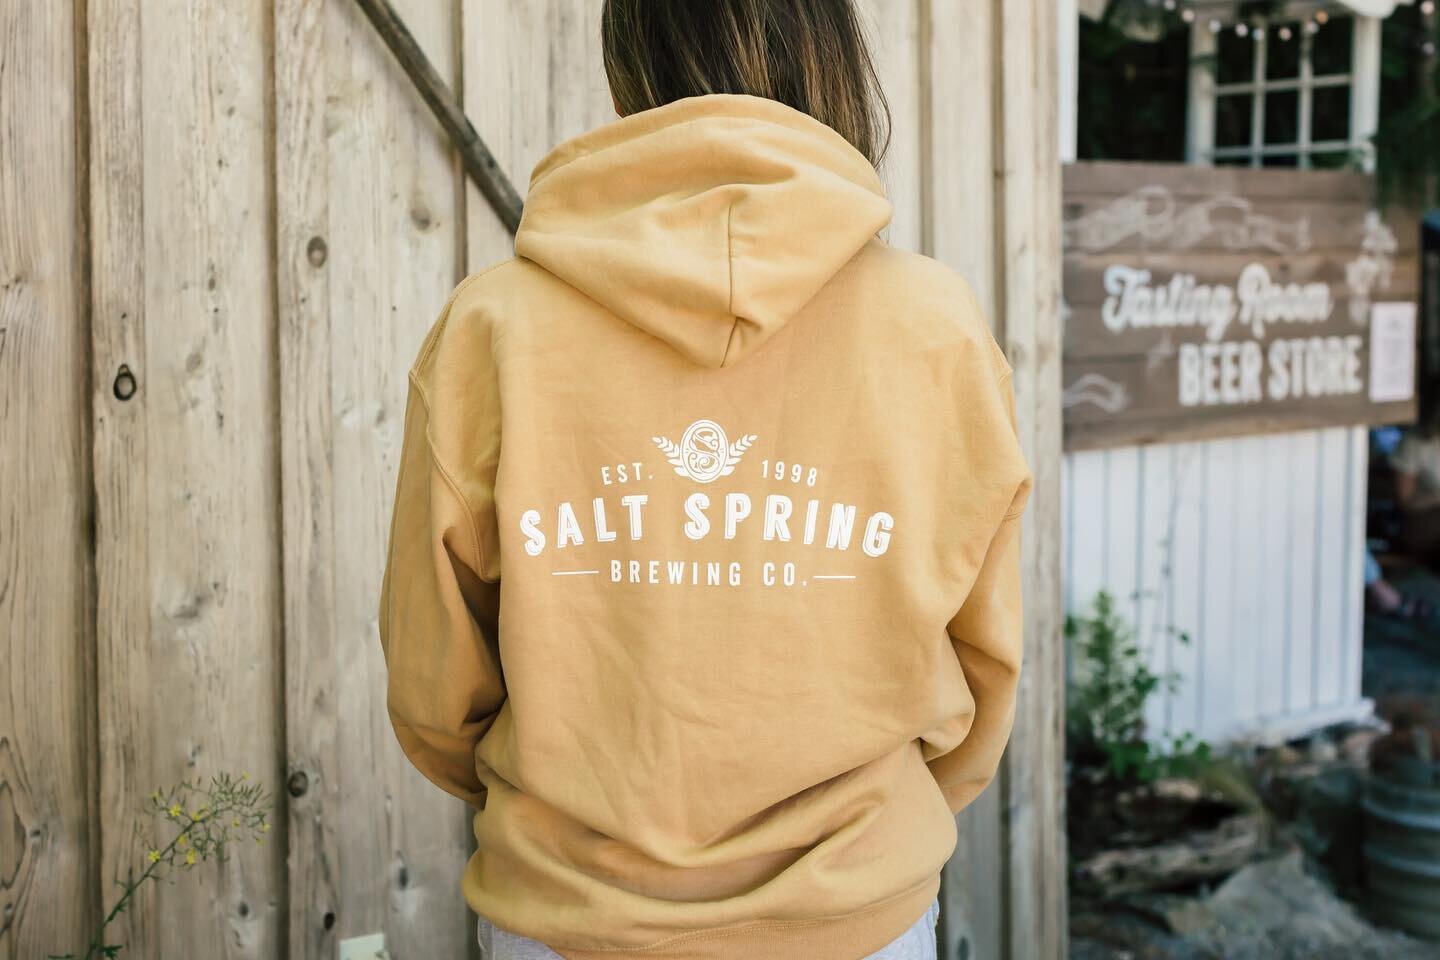 We are loving our new hoodies, and we know you&rsquo;ll love them too! 😉 

Our merch is from @passionsports.ca in Victoria. 

📸 @ashleydrody 

#brewery #bcbrewery #saltspring #saltspringisland #yyjlocal #yyjloveslocal #beerstagram #beerdrinker #exp